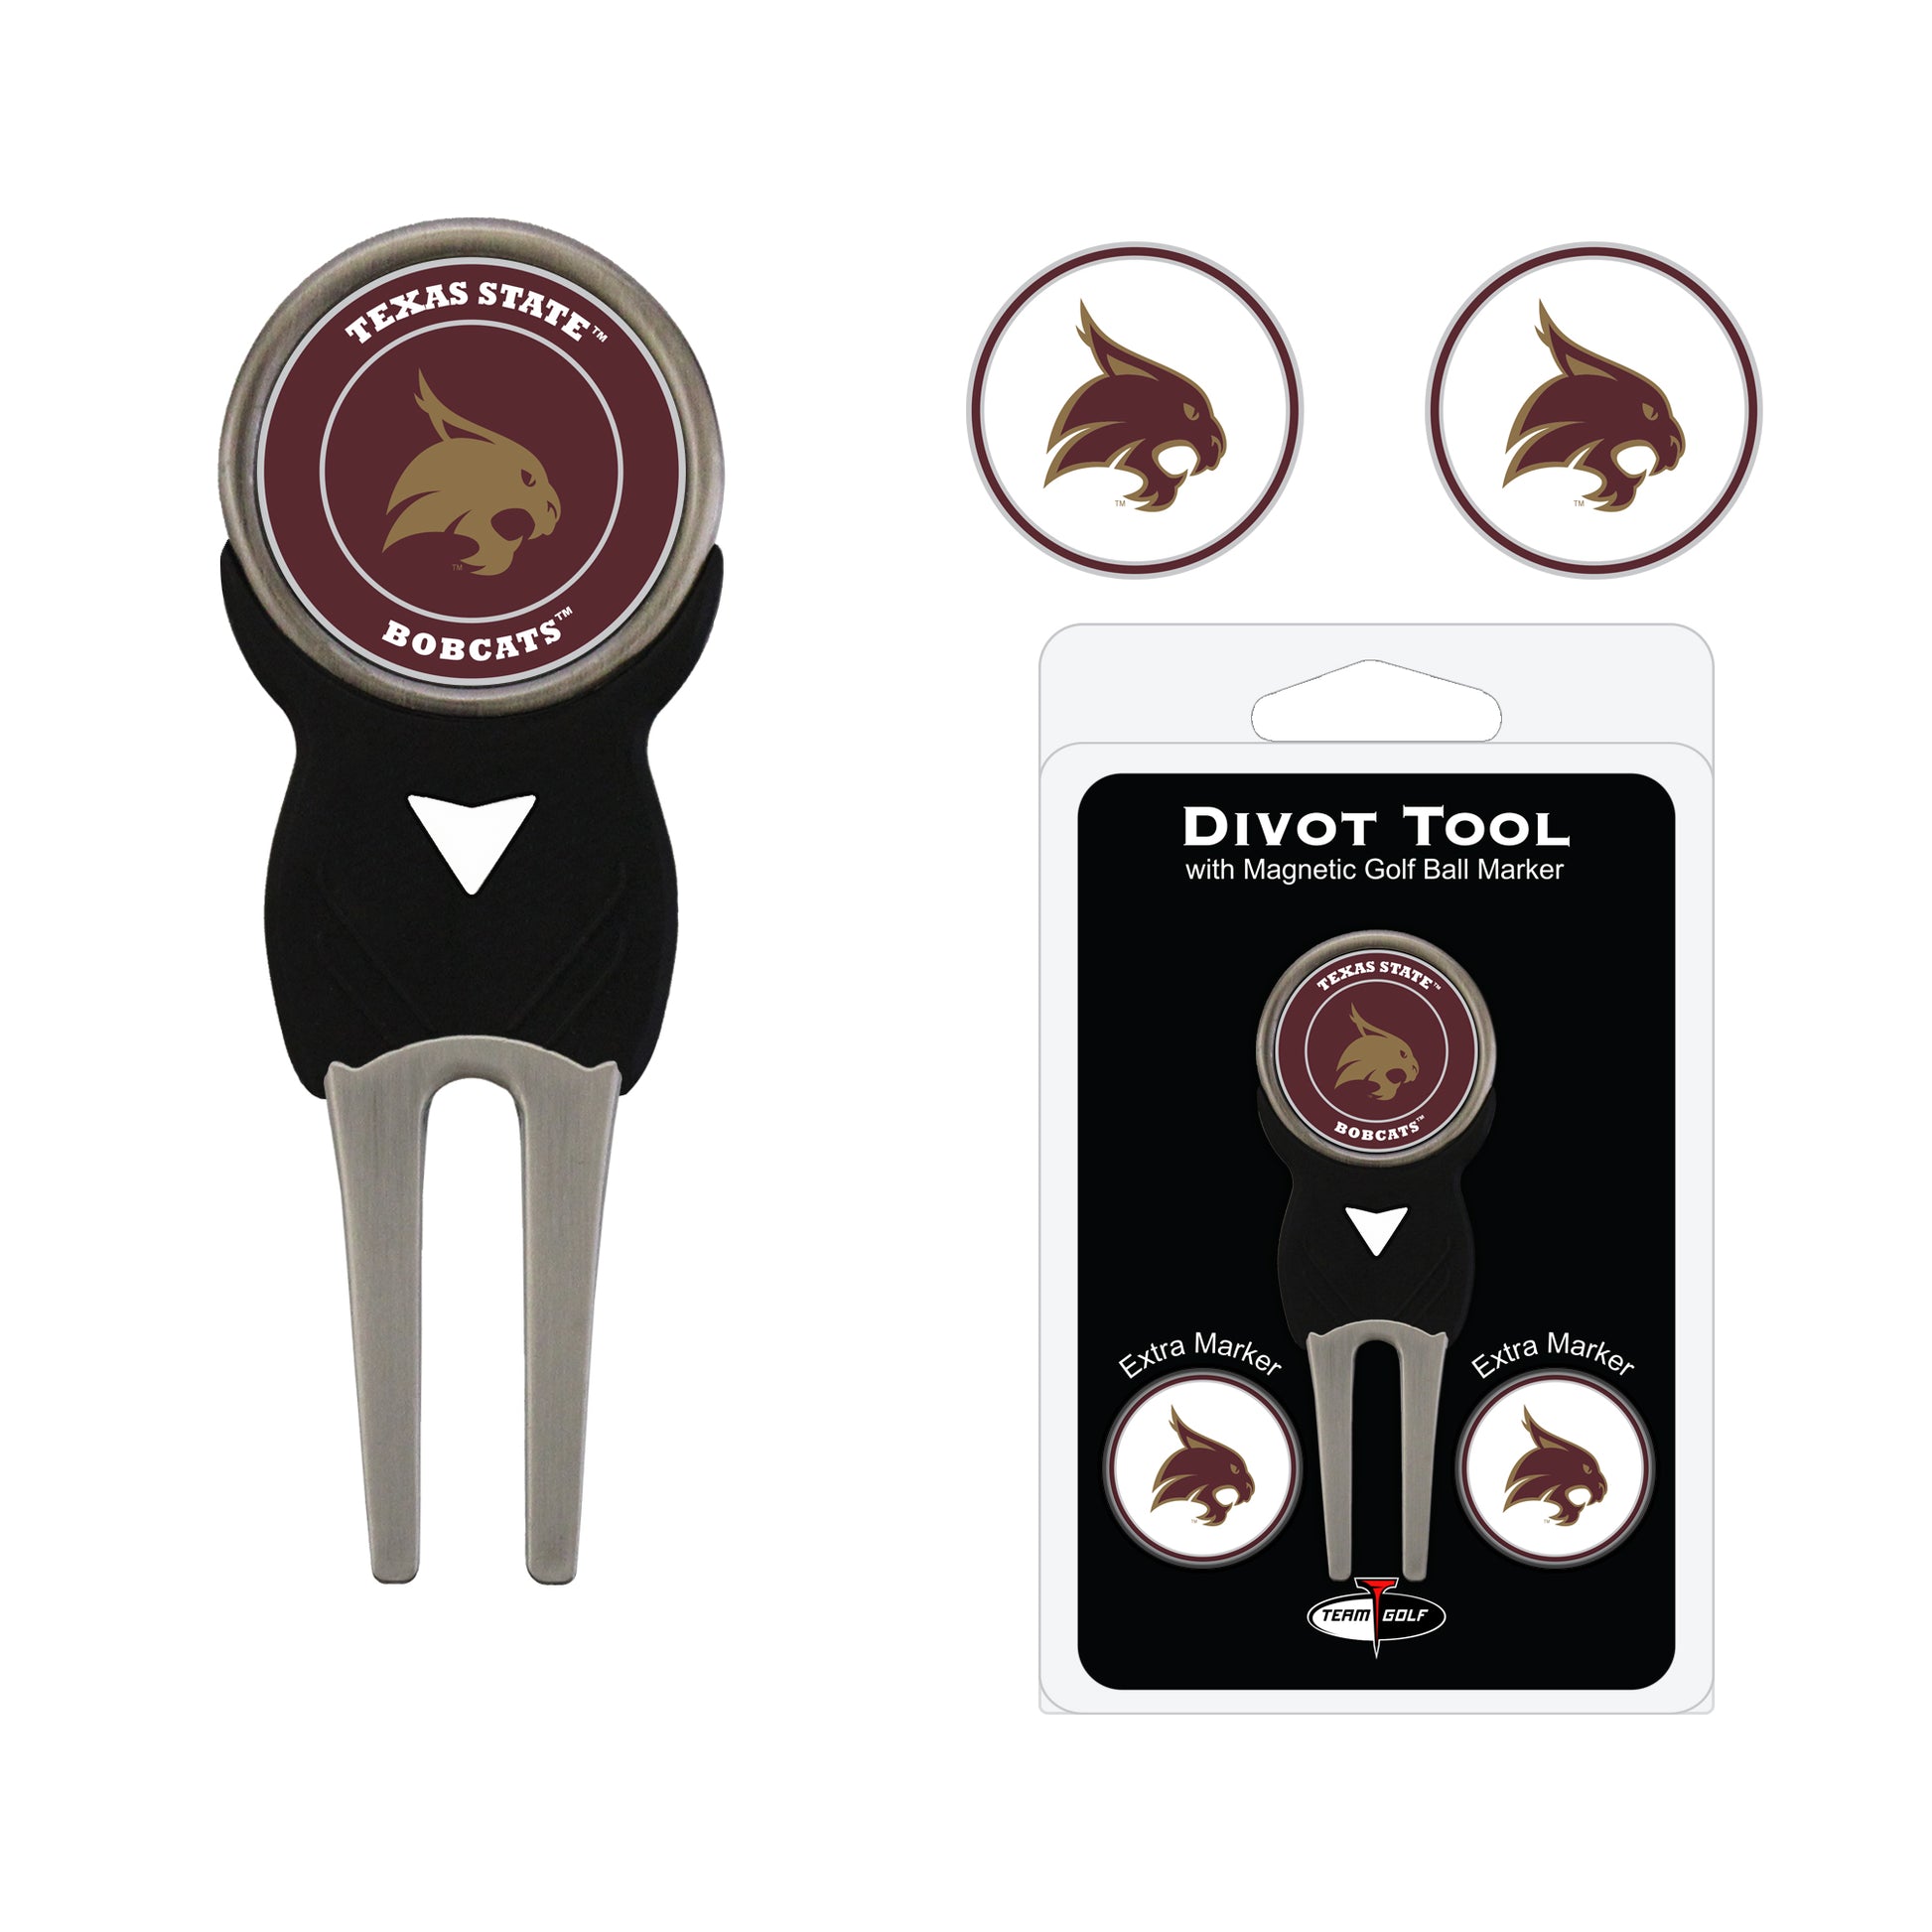 NCAA personalized golf divot tool - texas state bobcats